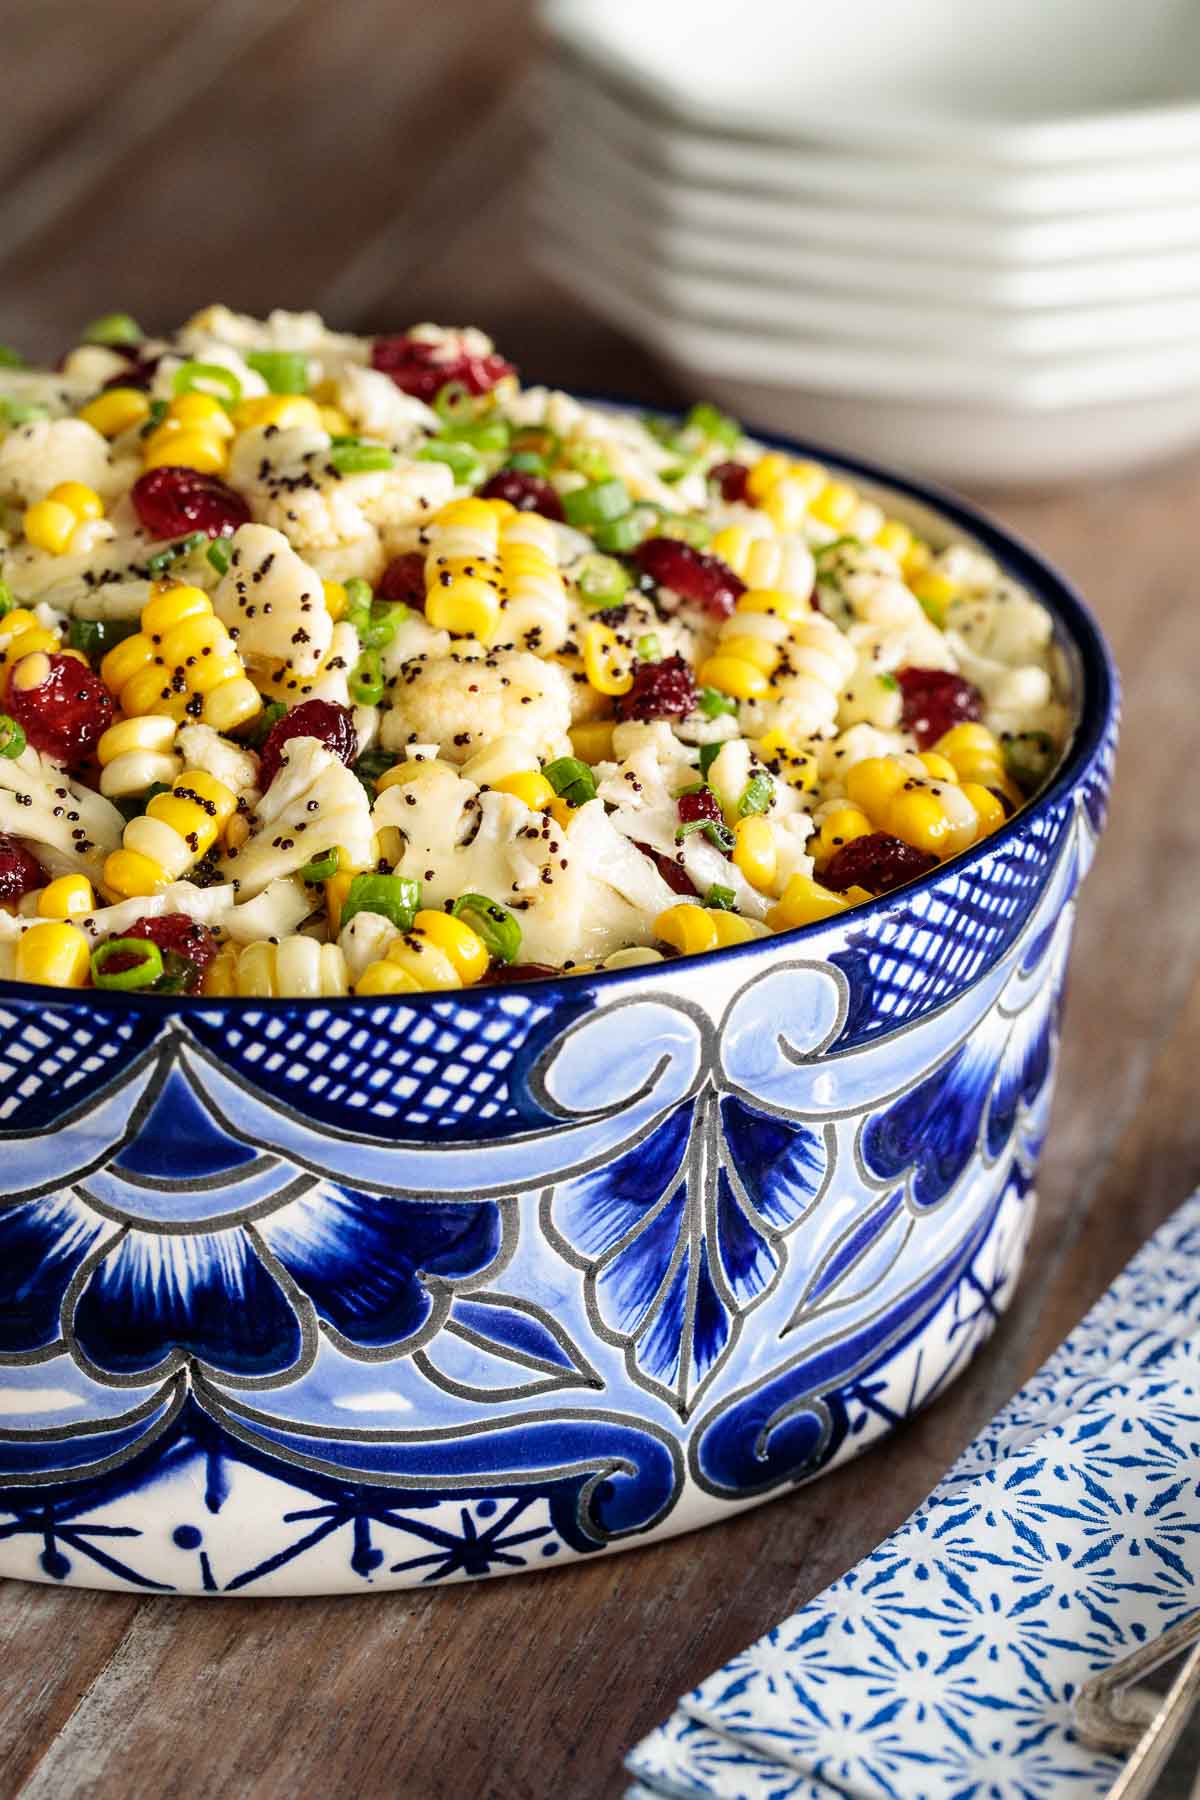 Vertical photo of a Cauliflower and Fresh Corn Salad in a blue and white patterned bowl on a wooden table.